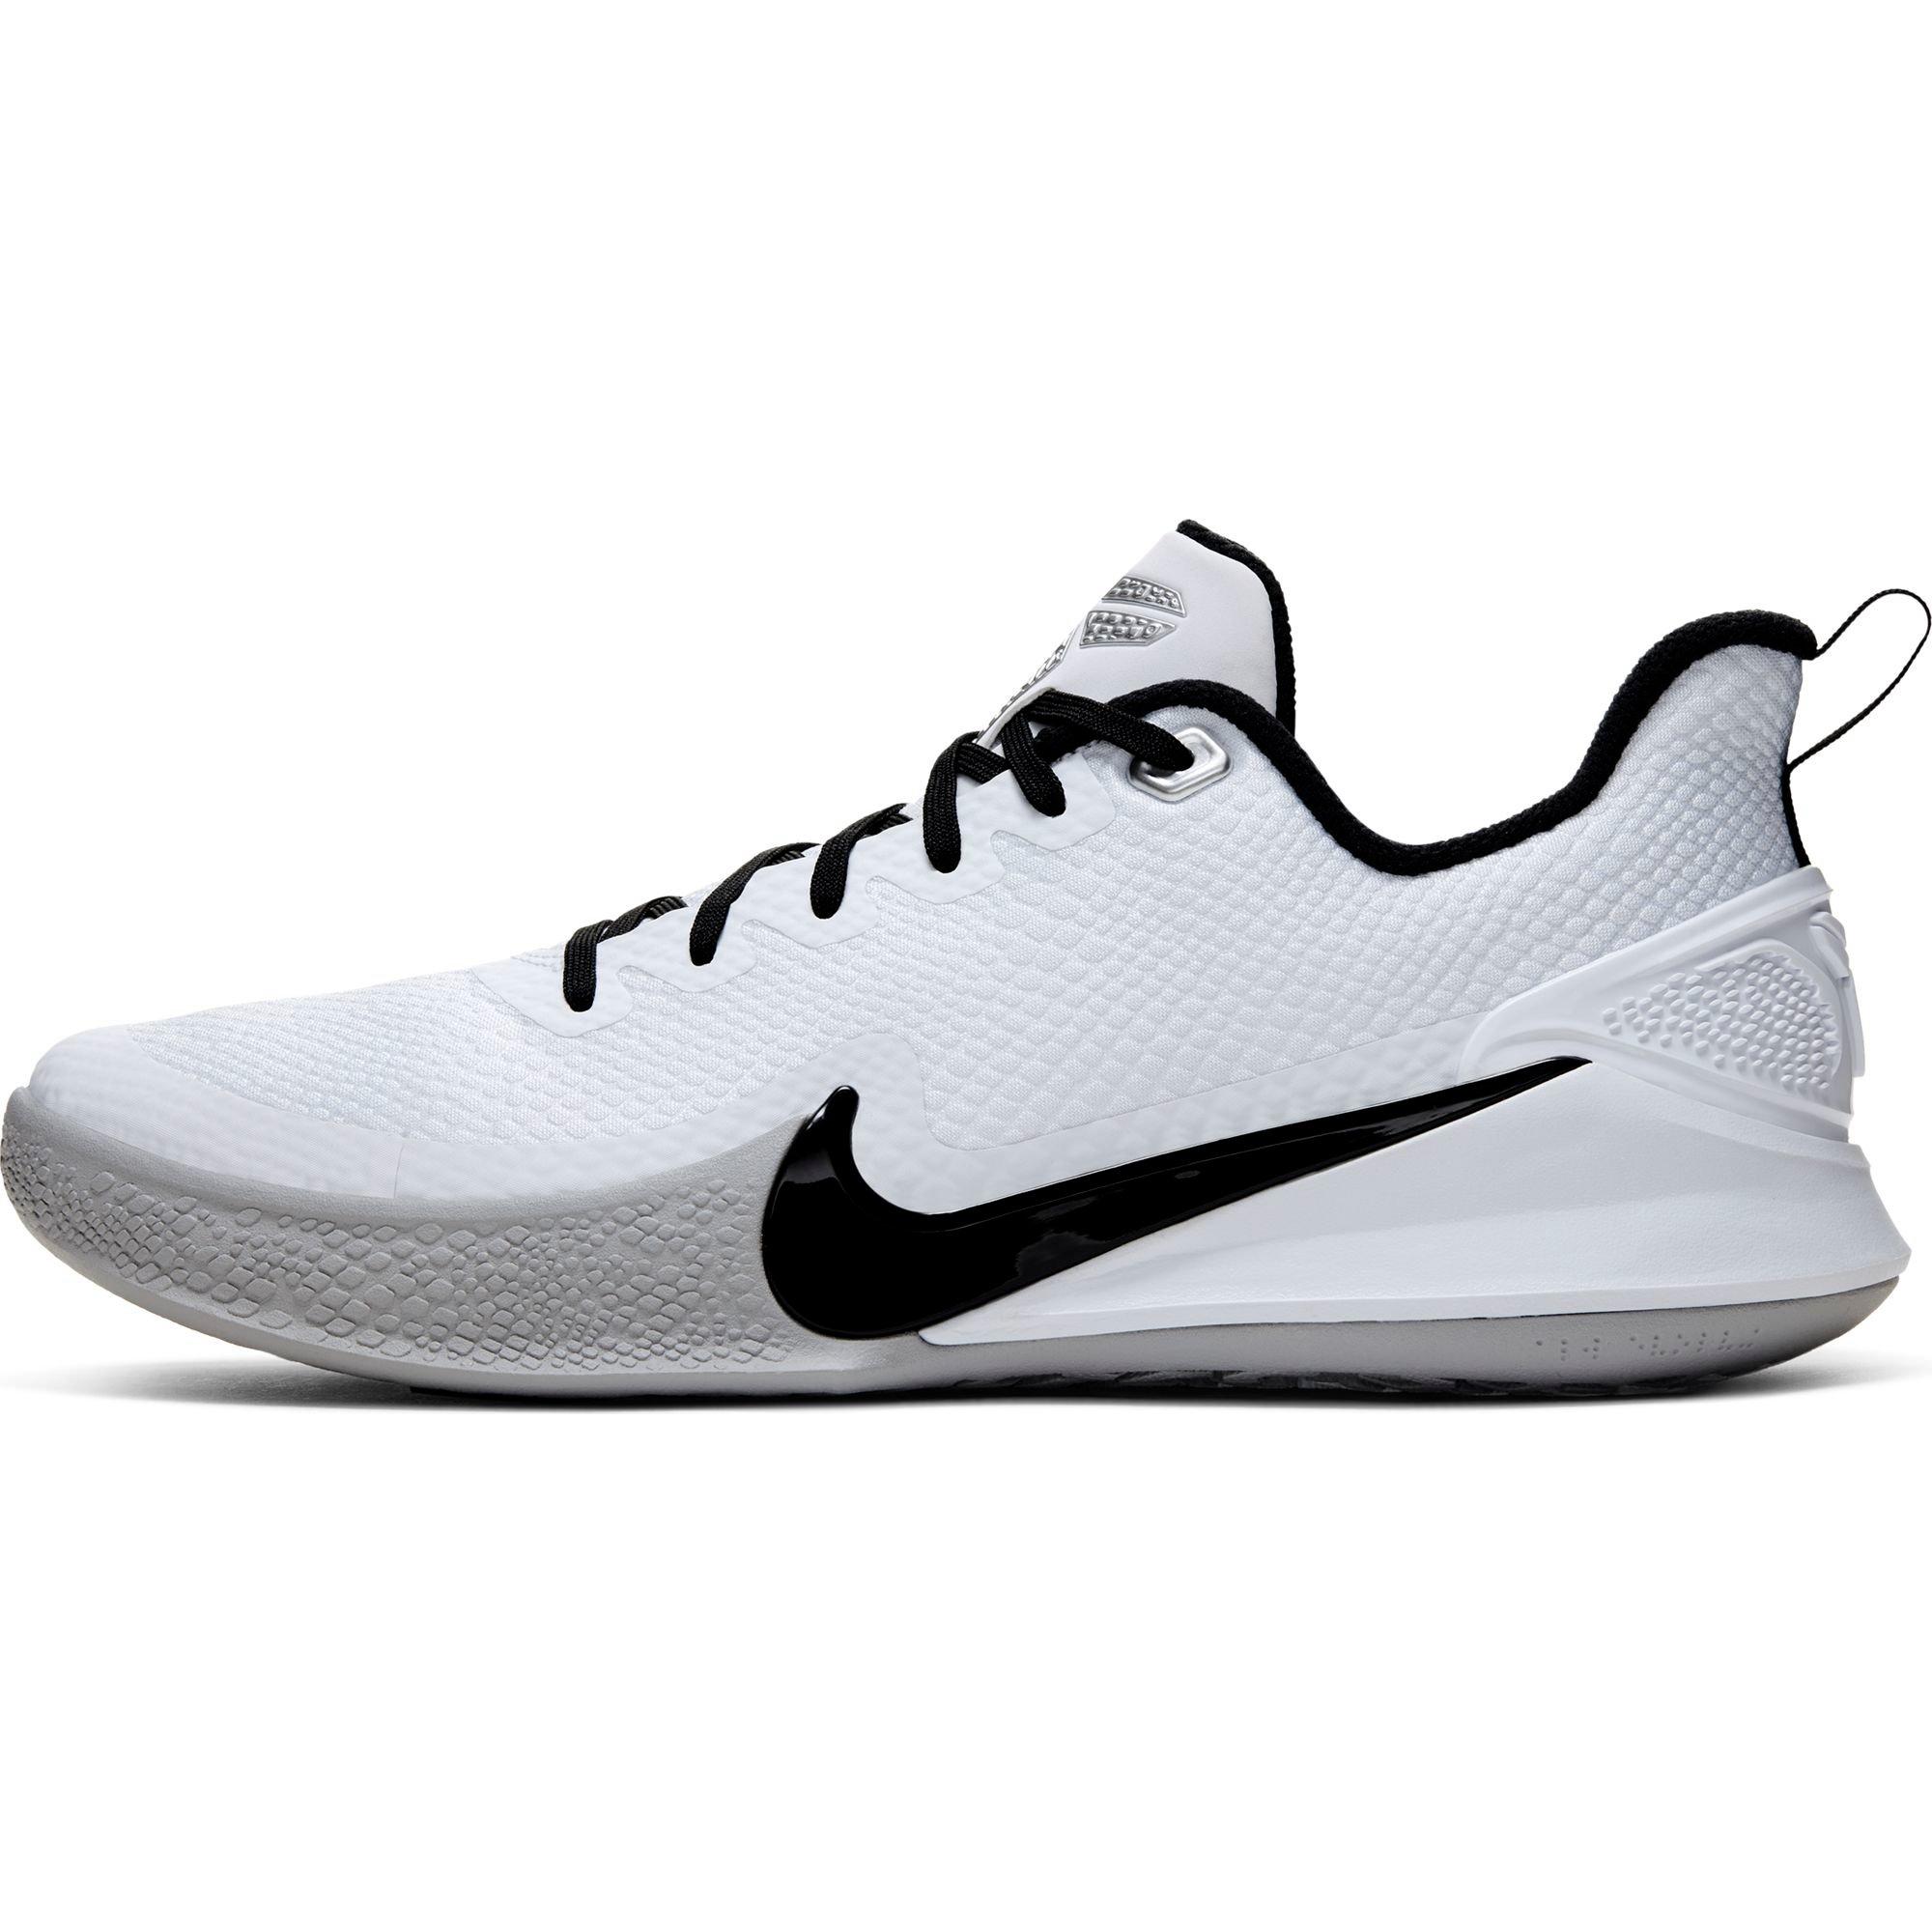 kobe volleyball shoes white